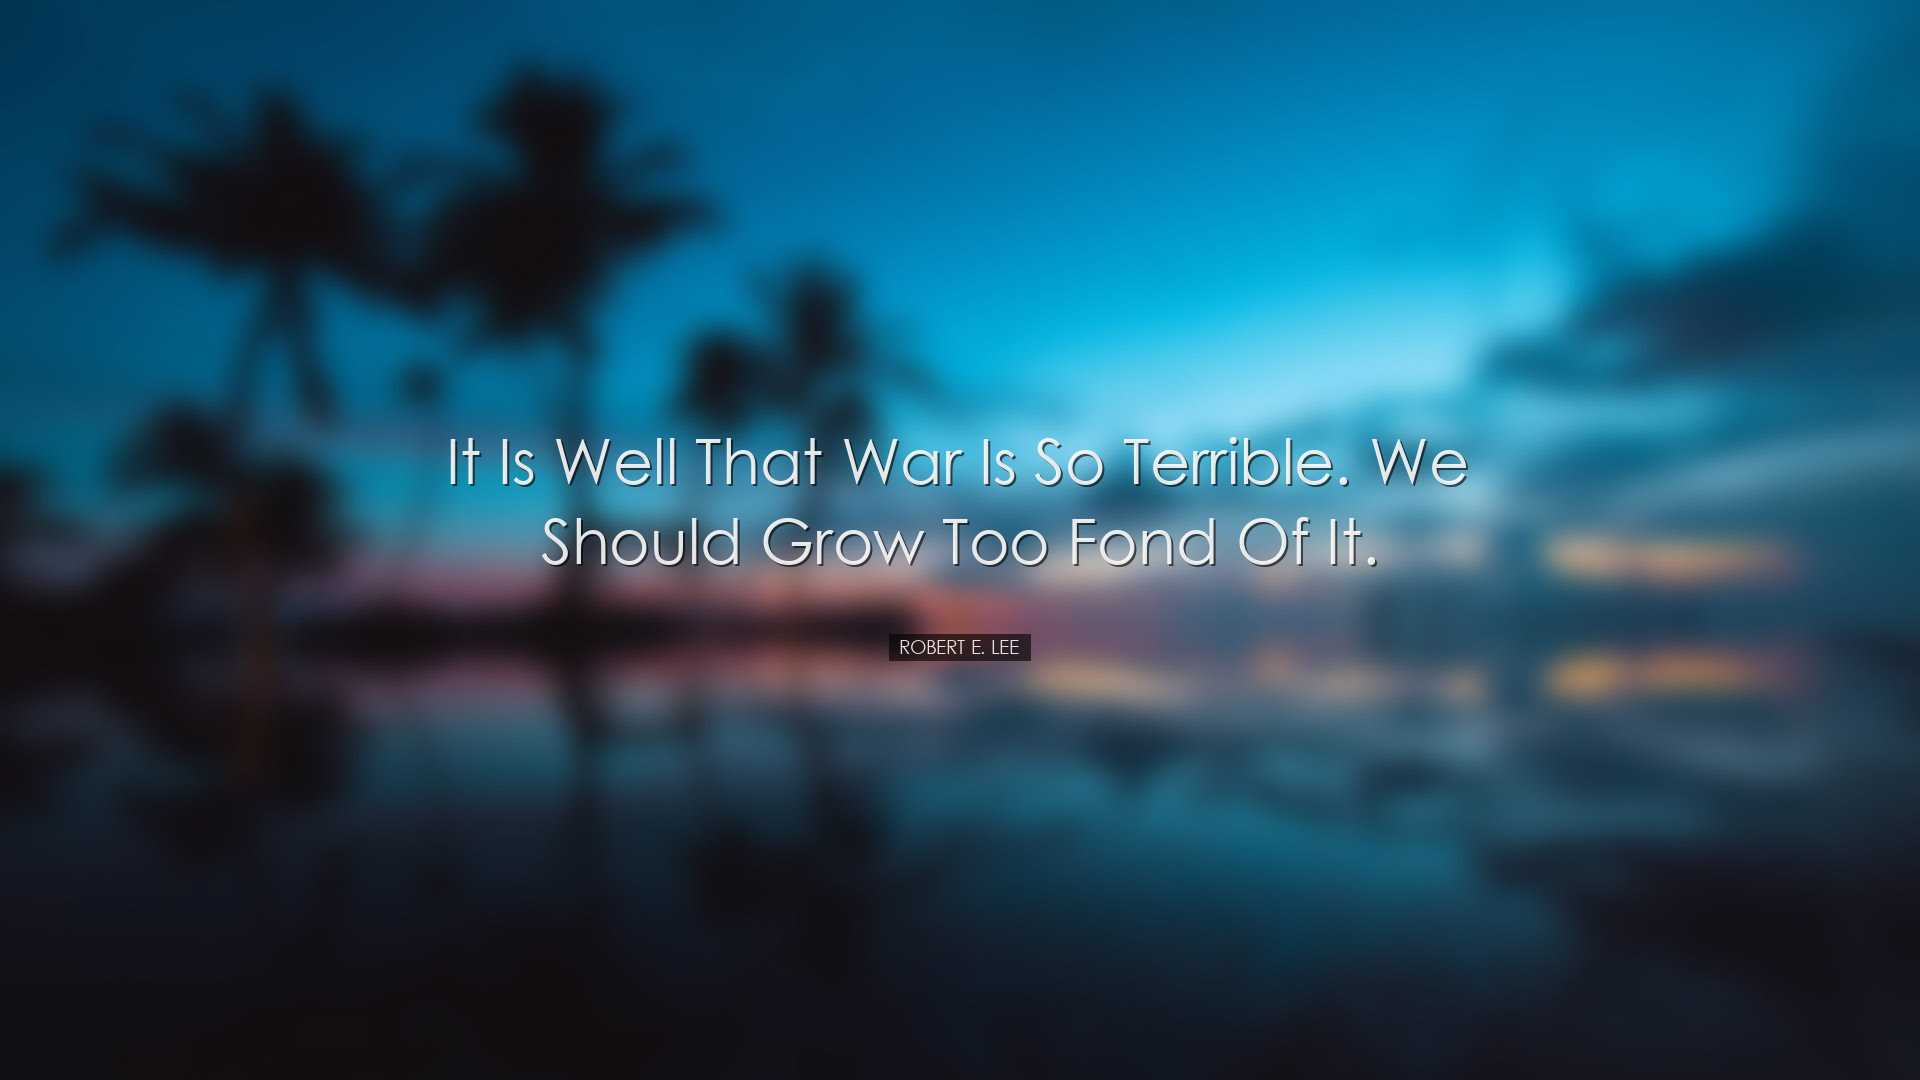 It is well that war is so terrible. We should grow too fond of it.